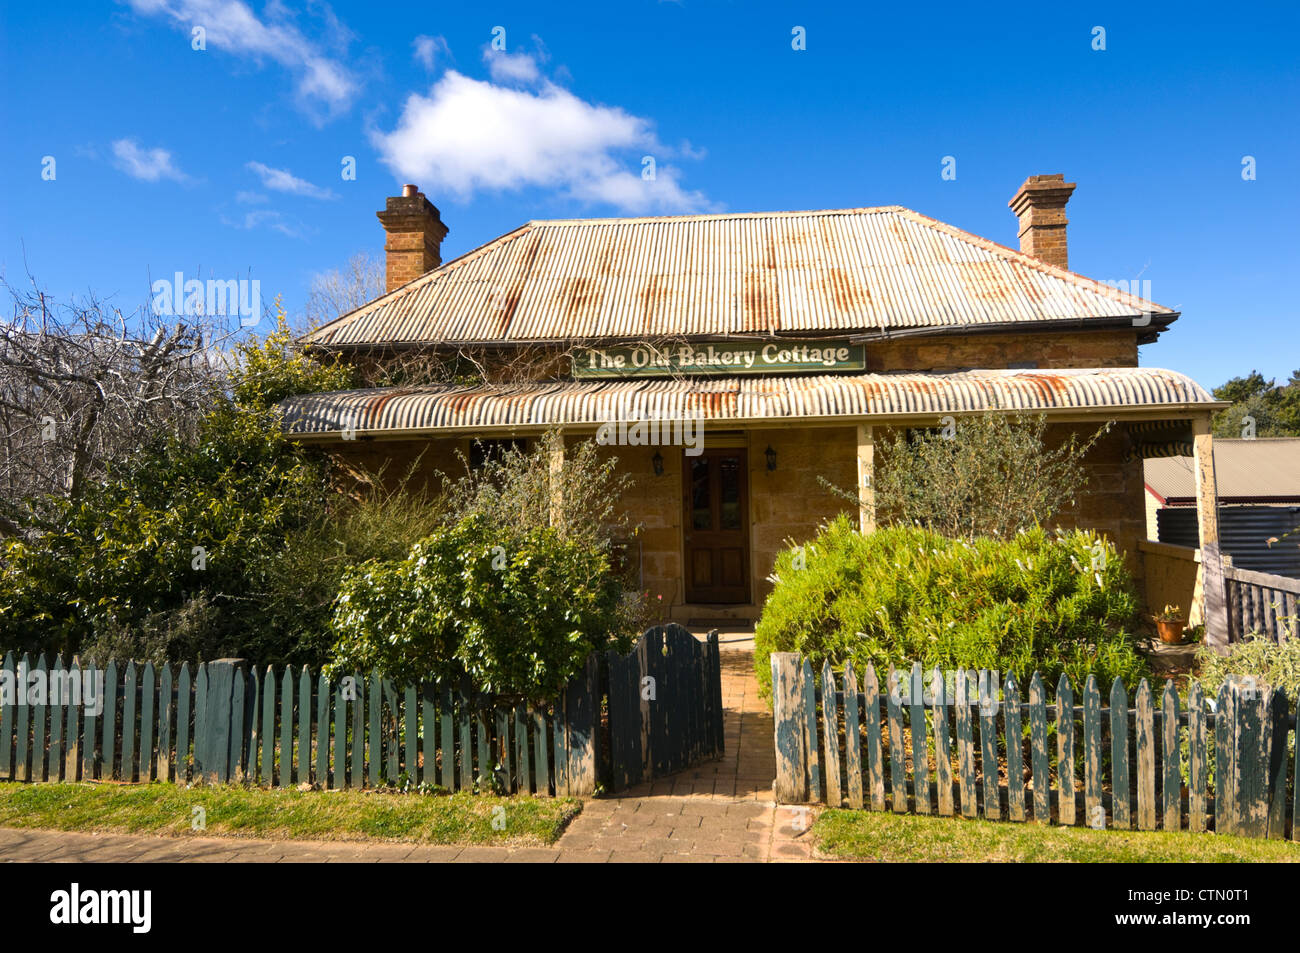 The Old Bakery Cottage, Berrima, Southern Highlands, New South Wales, Australia Stock Photo